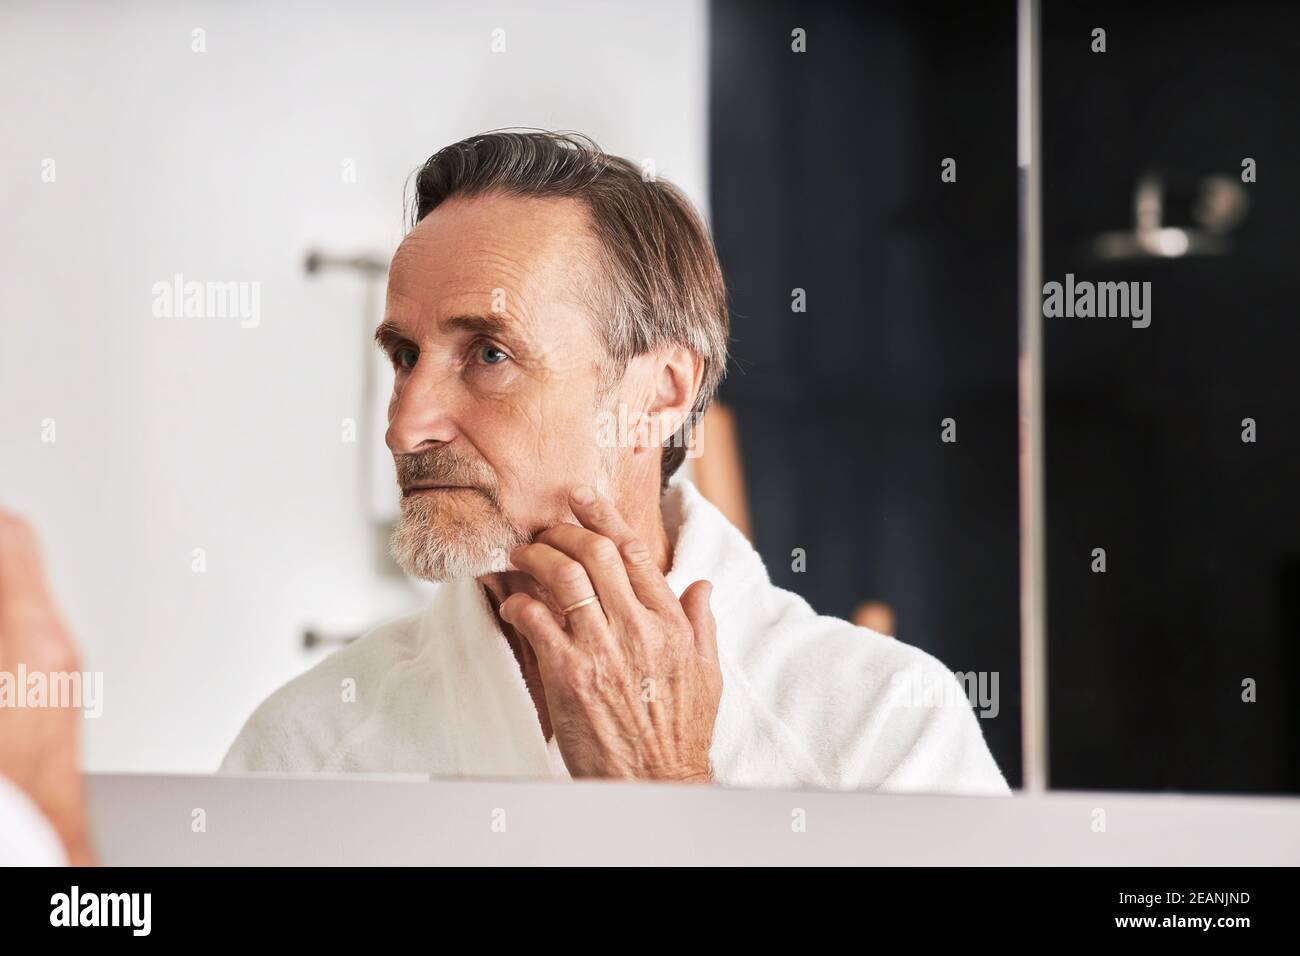 Senior man touching her face in bathroom in from of a mirror. Male in bathrobe looking at his reflection  Stock Photo